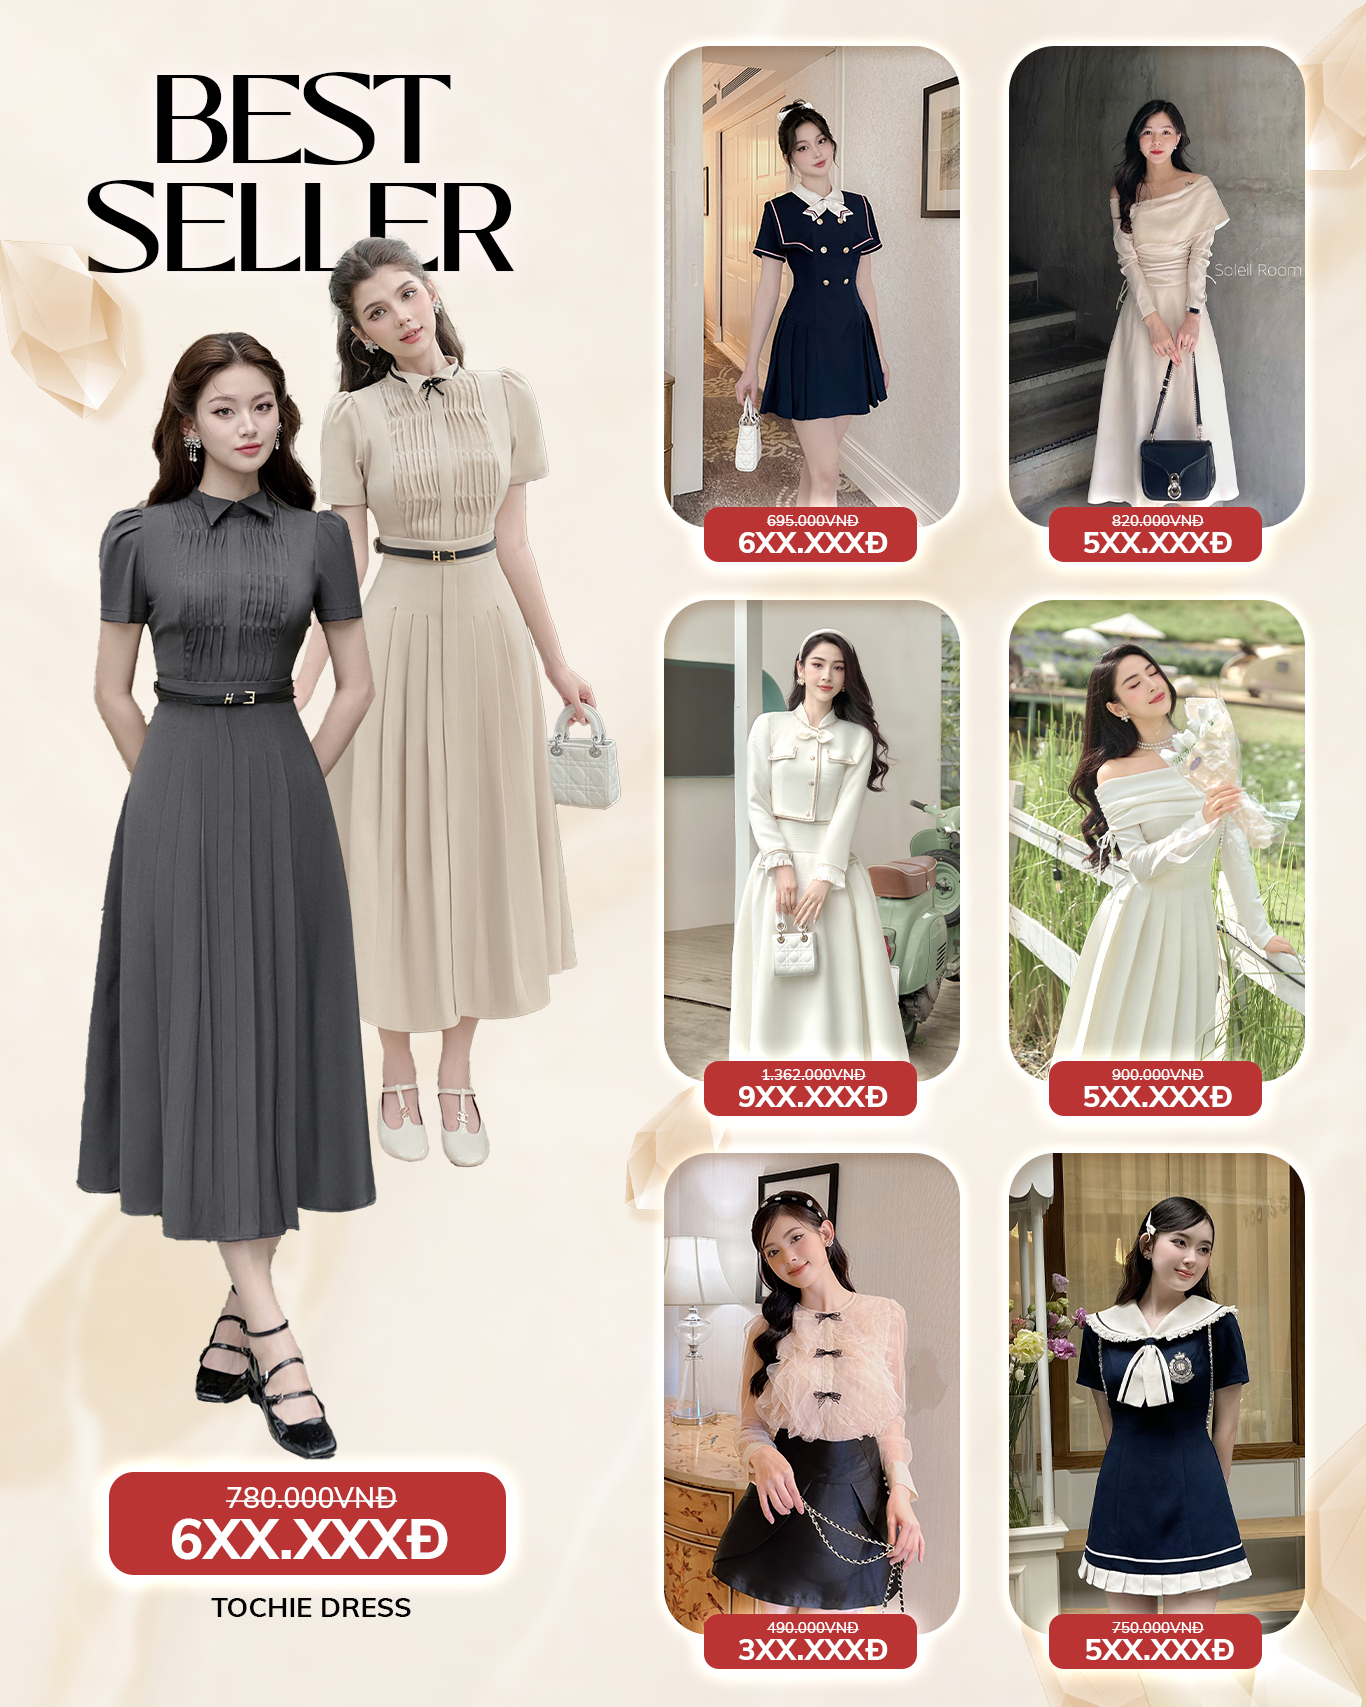 SOLEIL ROOM - Shopee Mall Online